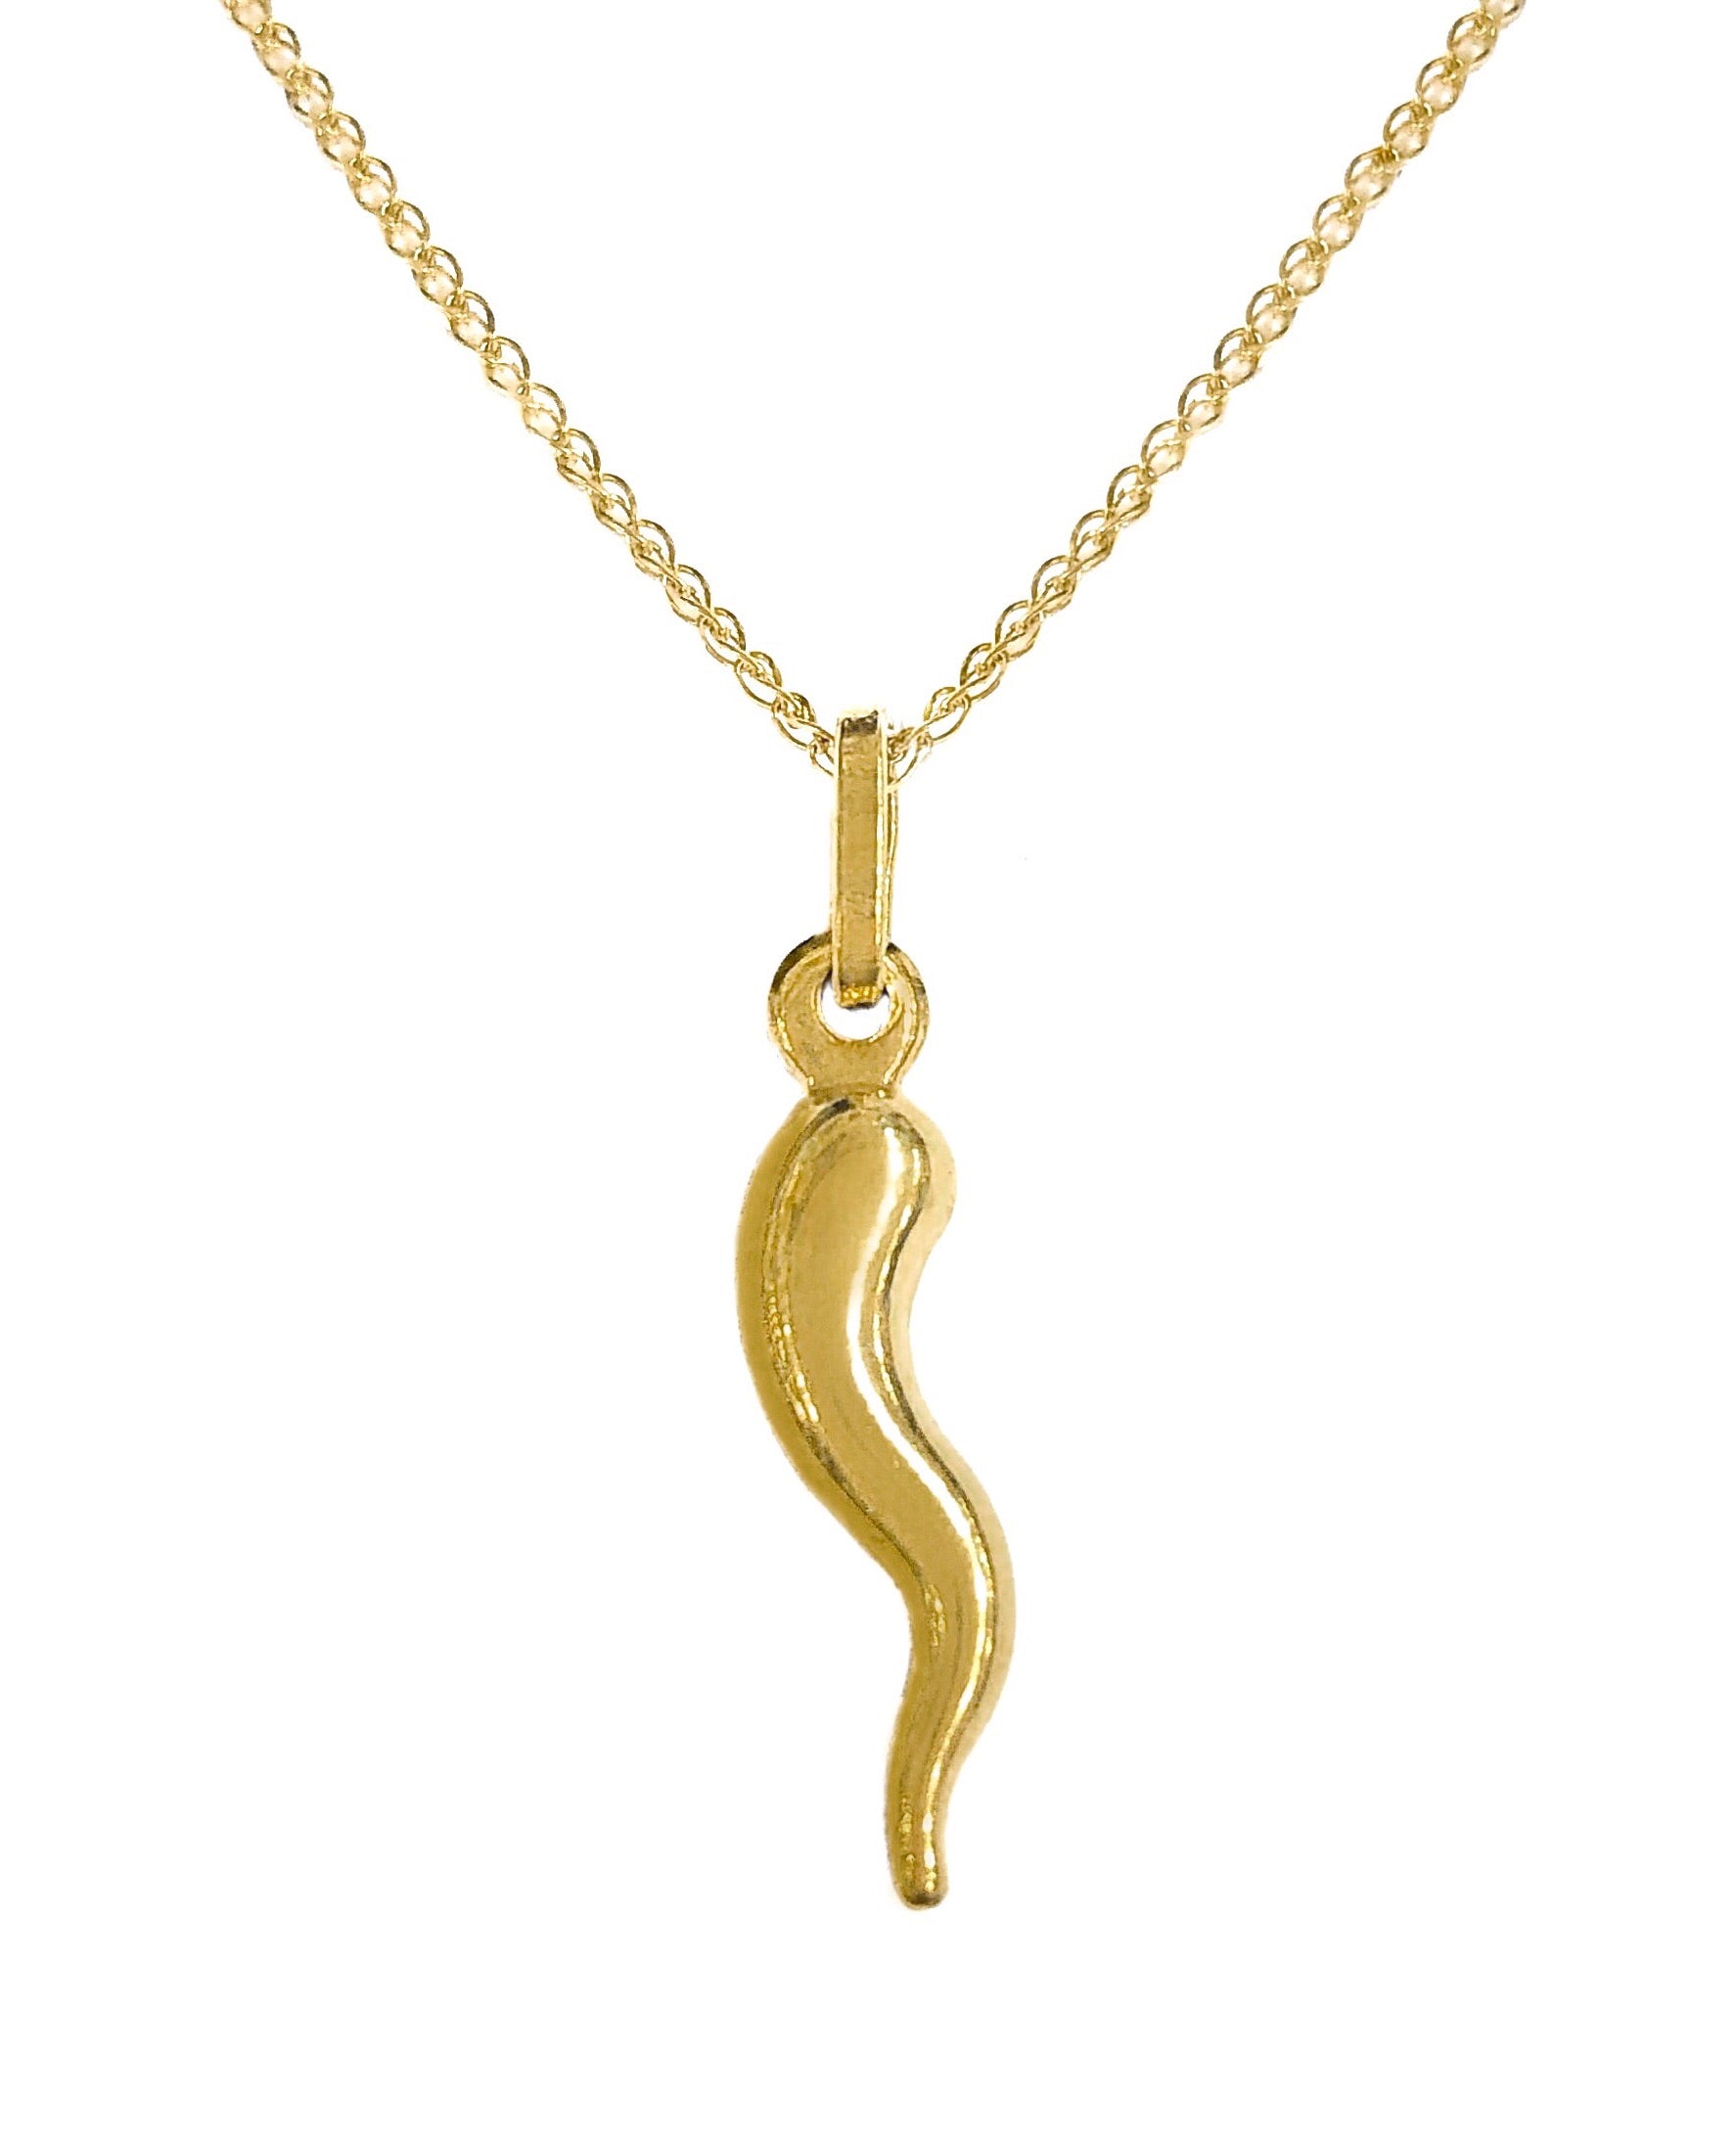 14K YELLOW GOLD SQUIGGLE ABSTRACT NECKLACE